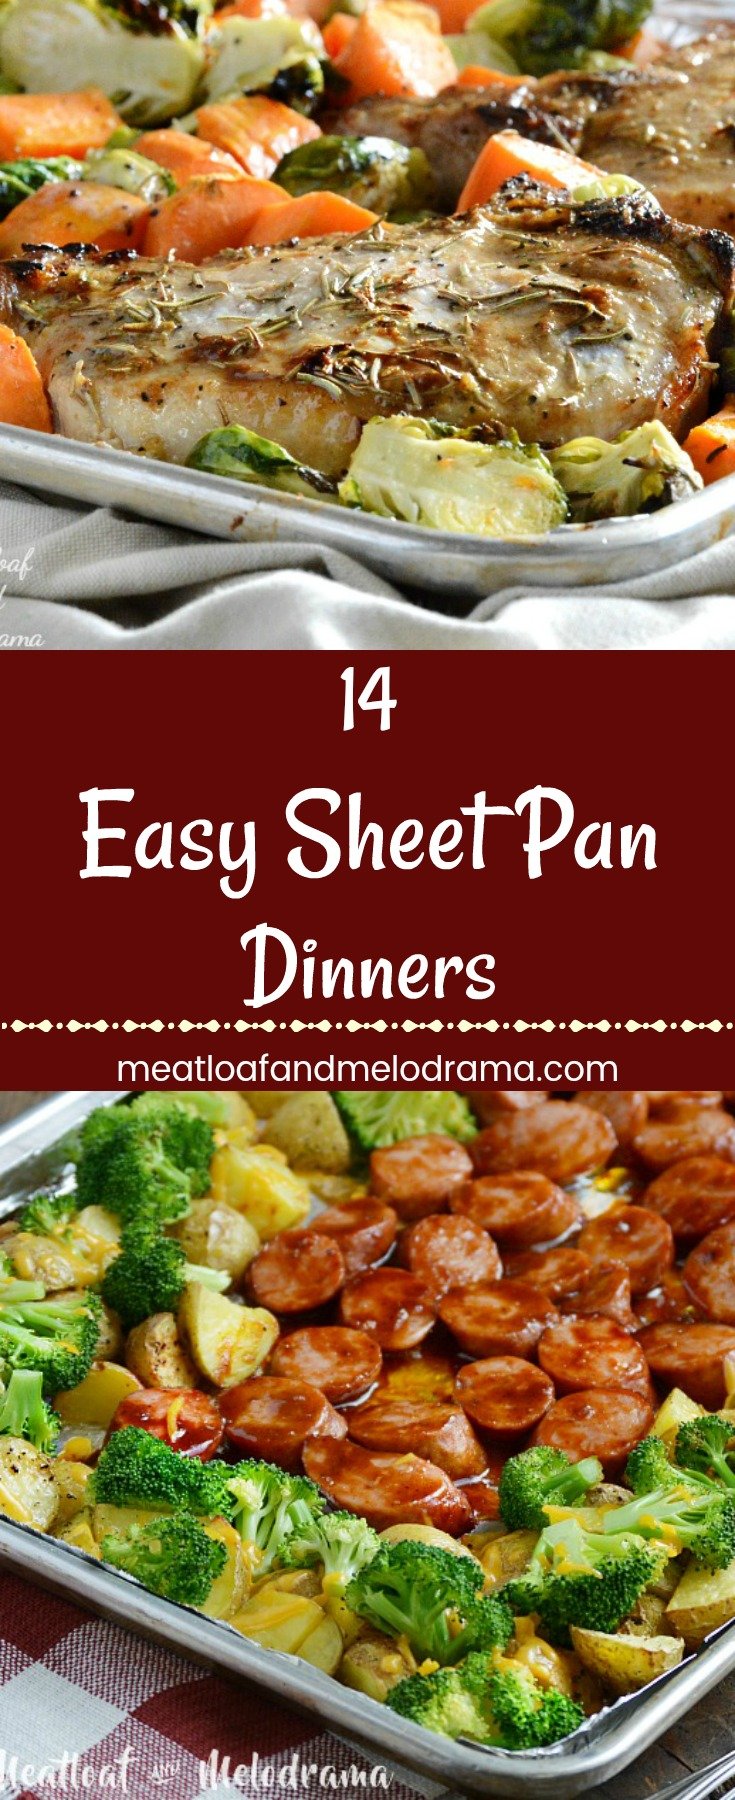 14 Easy Sheet Pan Dinners - Fast Easy dinners made in one pan and ready in 30 minutes or less. Perfect for busy weeknights, especially back to school and holiday season!